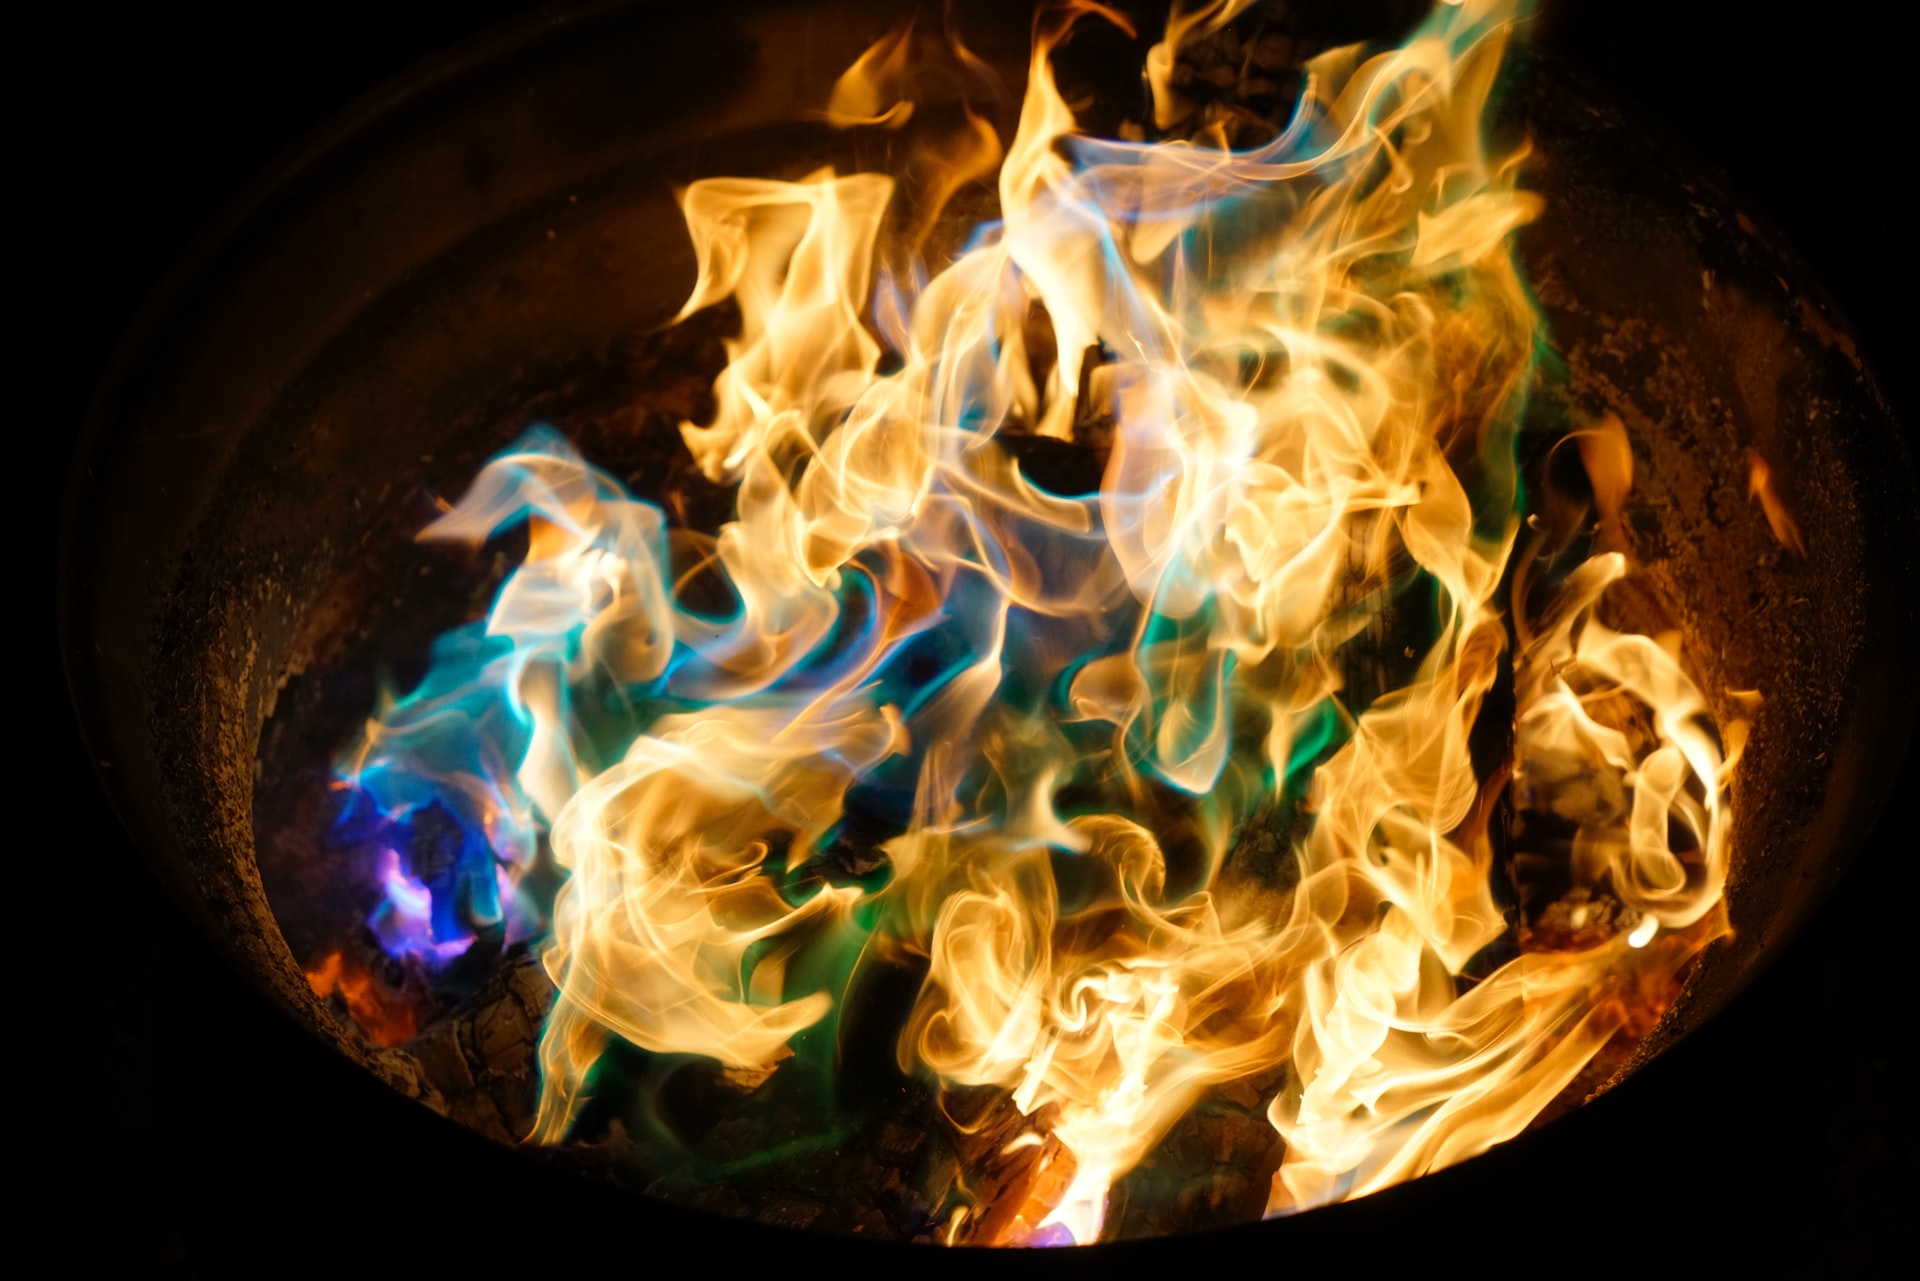 Photo of a fire with blues and greens woven into the flames